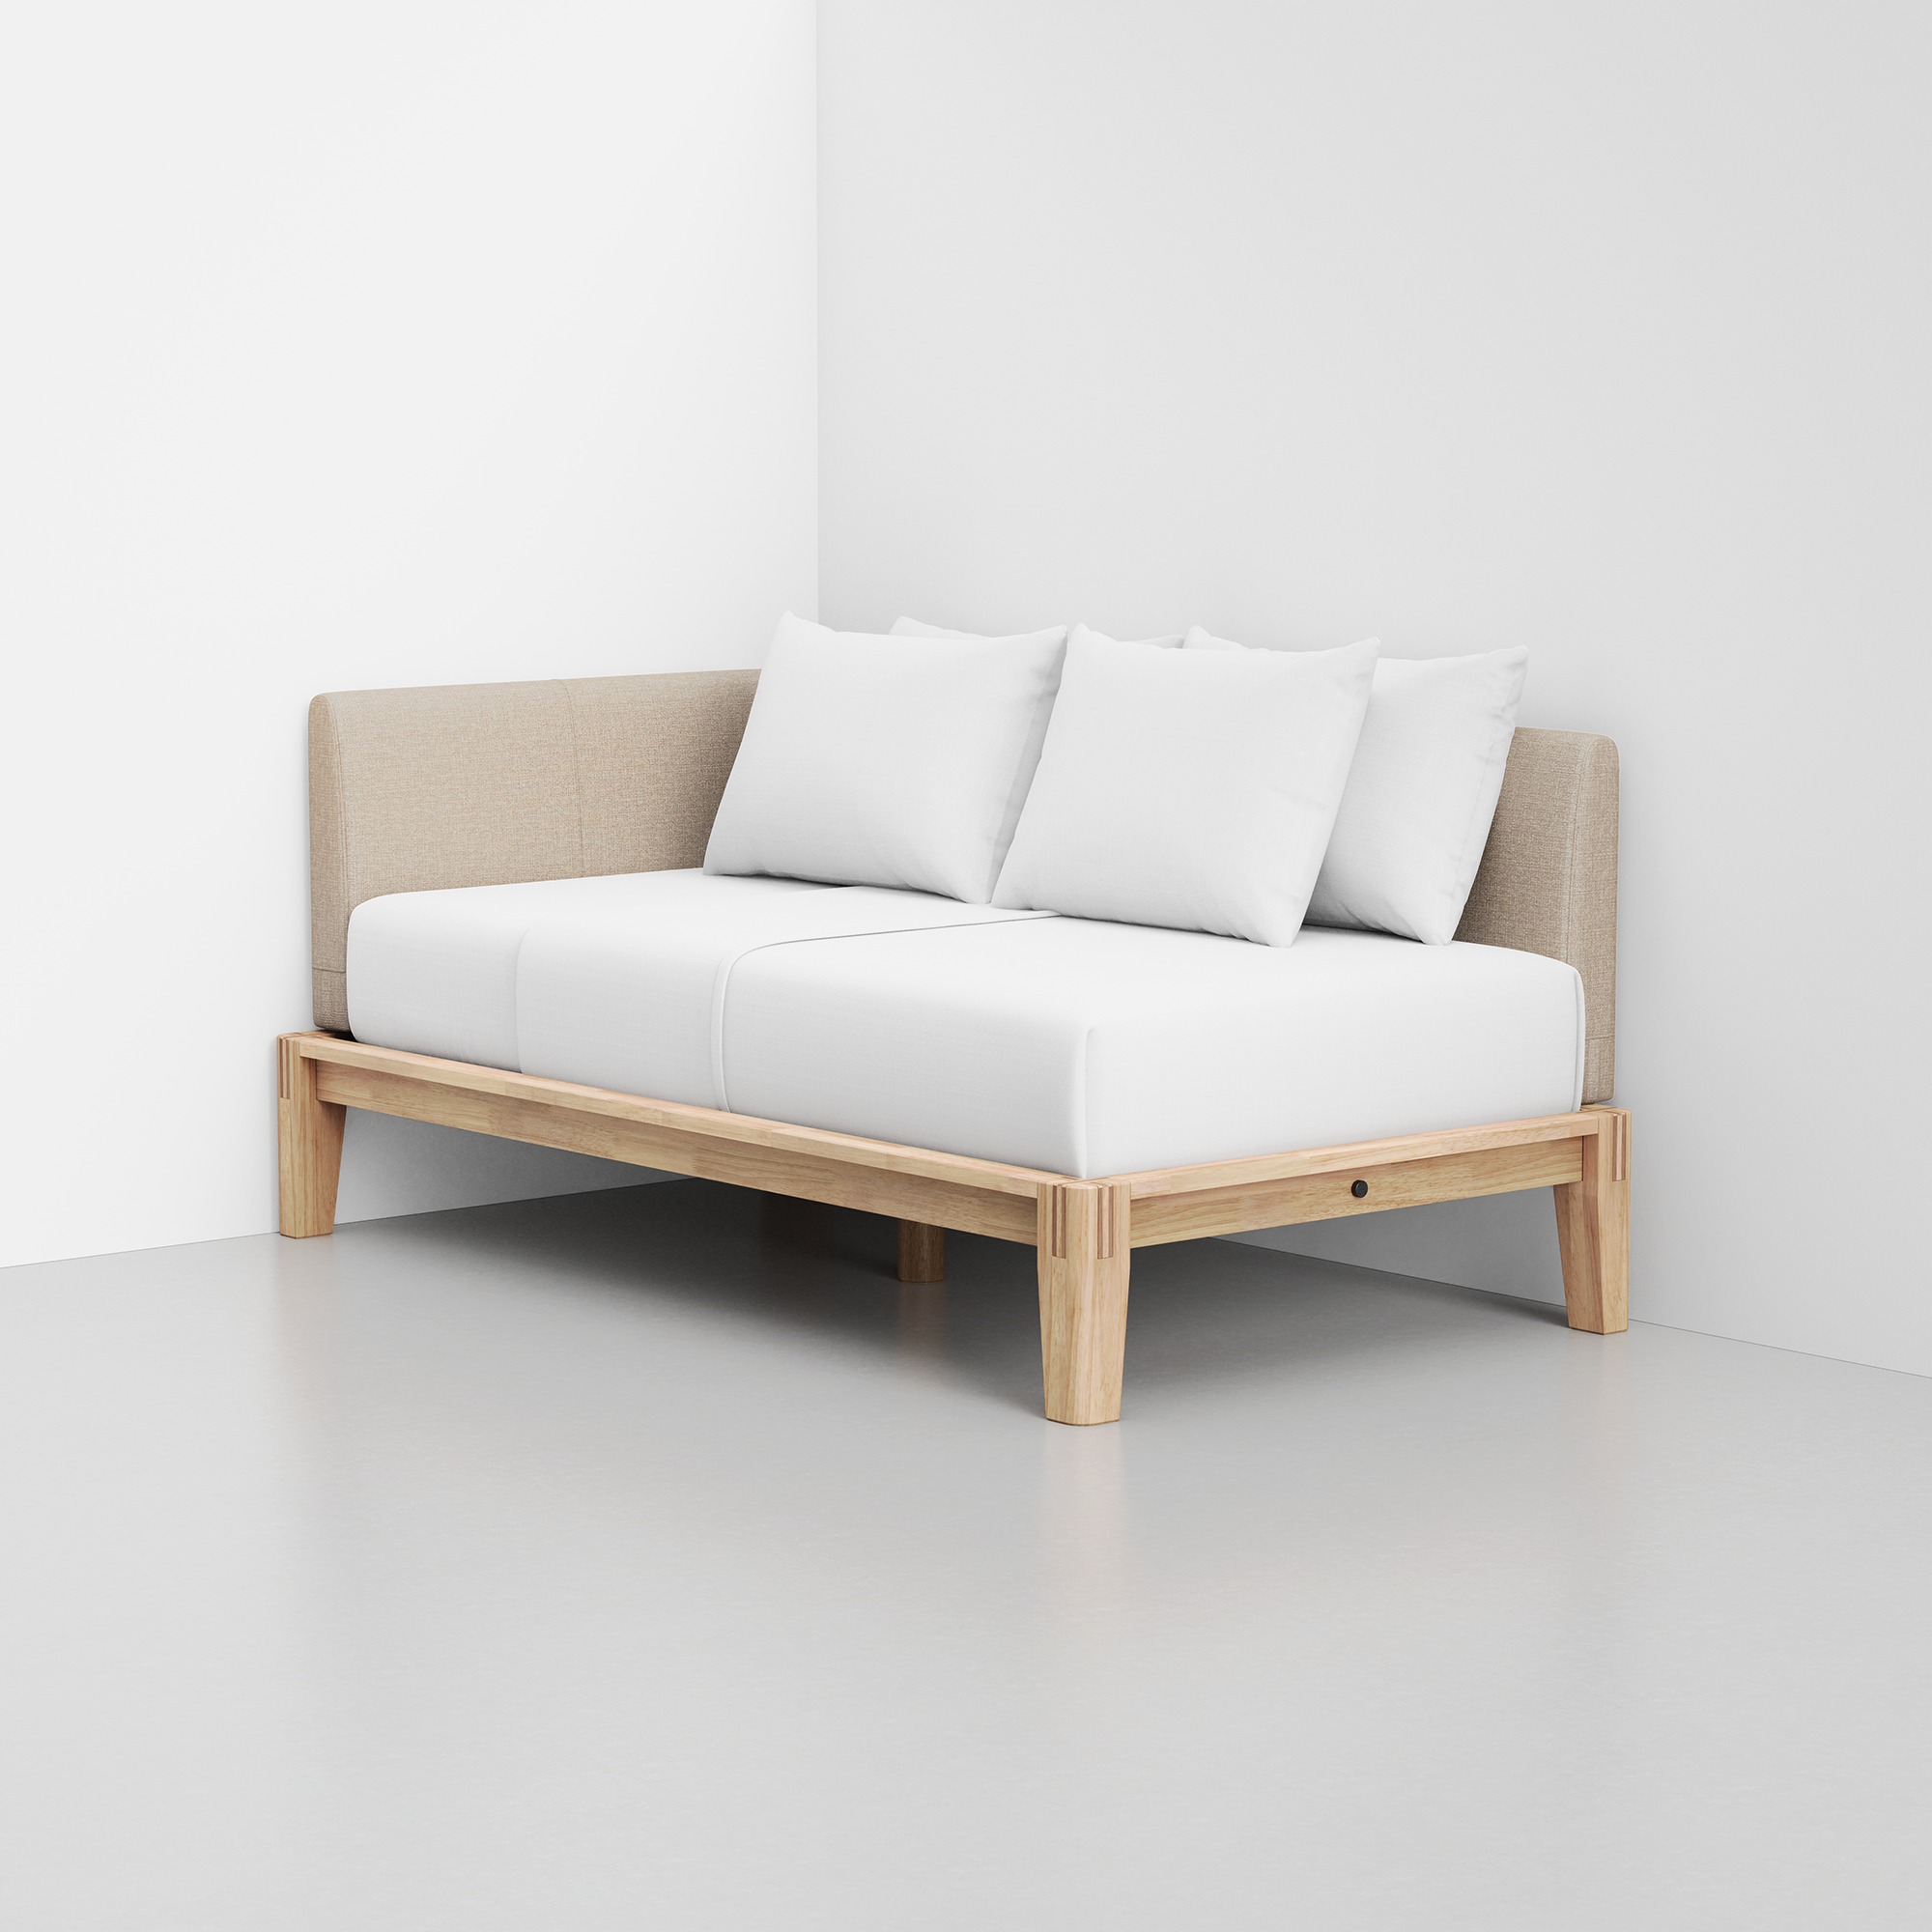 PDP Image: The Daybed (Natural / Dune) - Rendering - Pillows Stacked